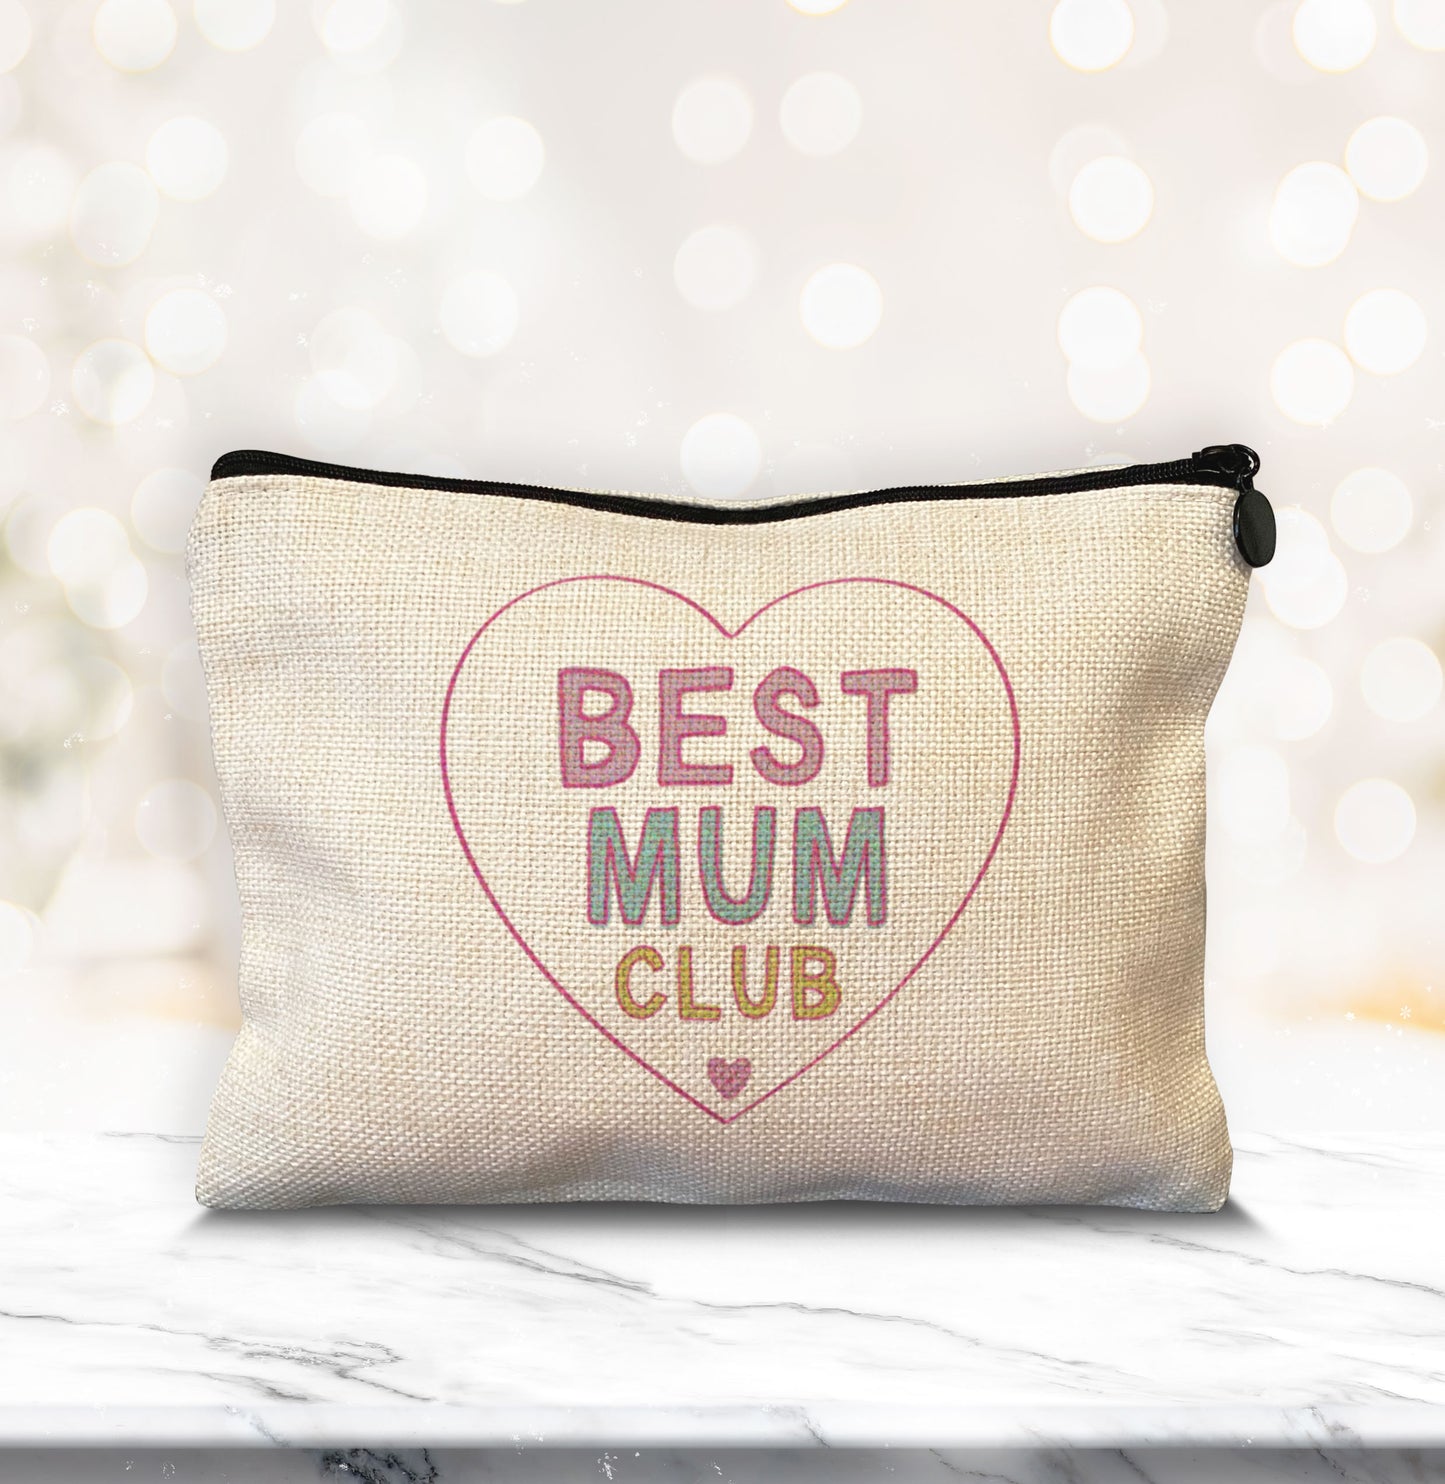 Best Mum club Make Up Bag. Cute Make Up Bag. Mother's Day Gift. New Mummy Gift.